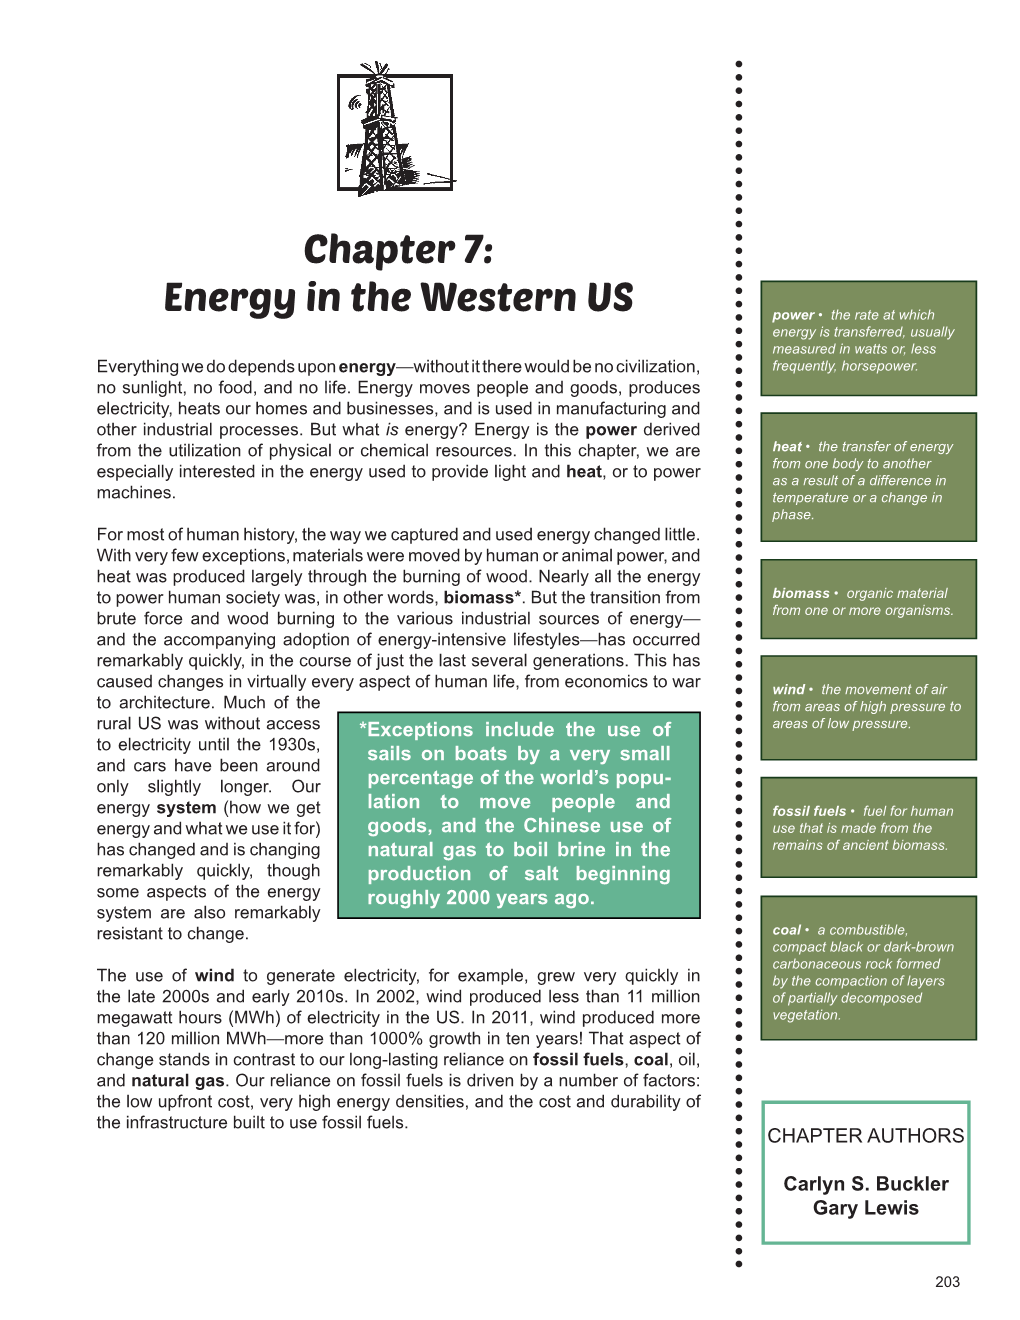 Chapter 7: Energy in the Western US